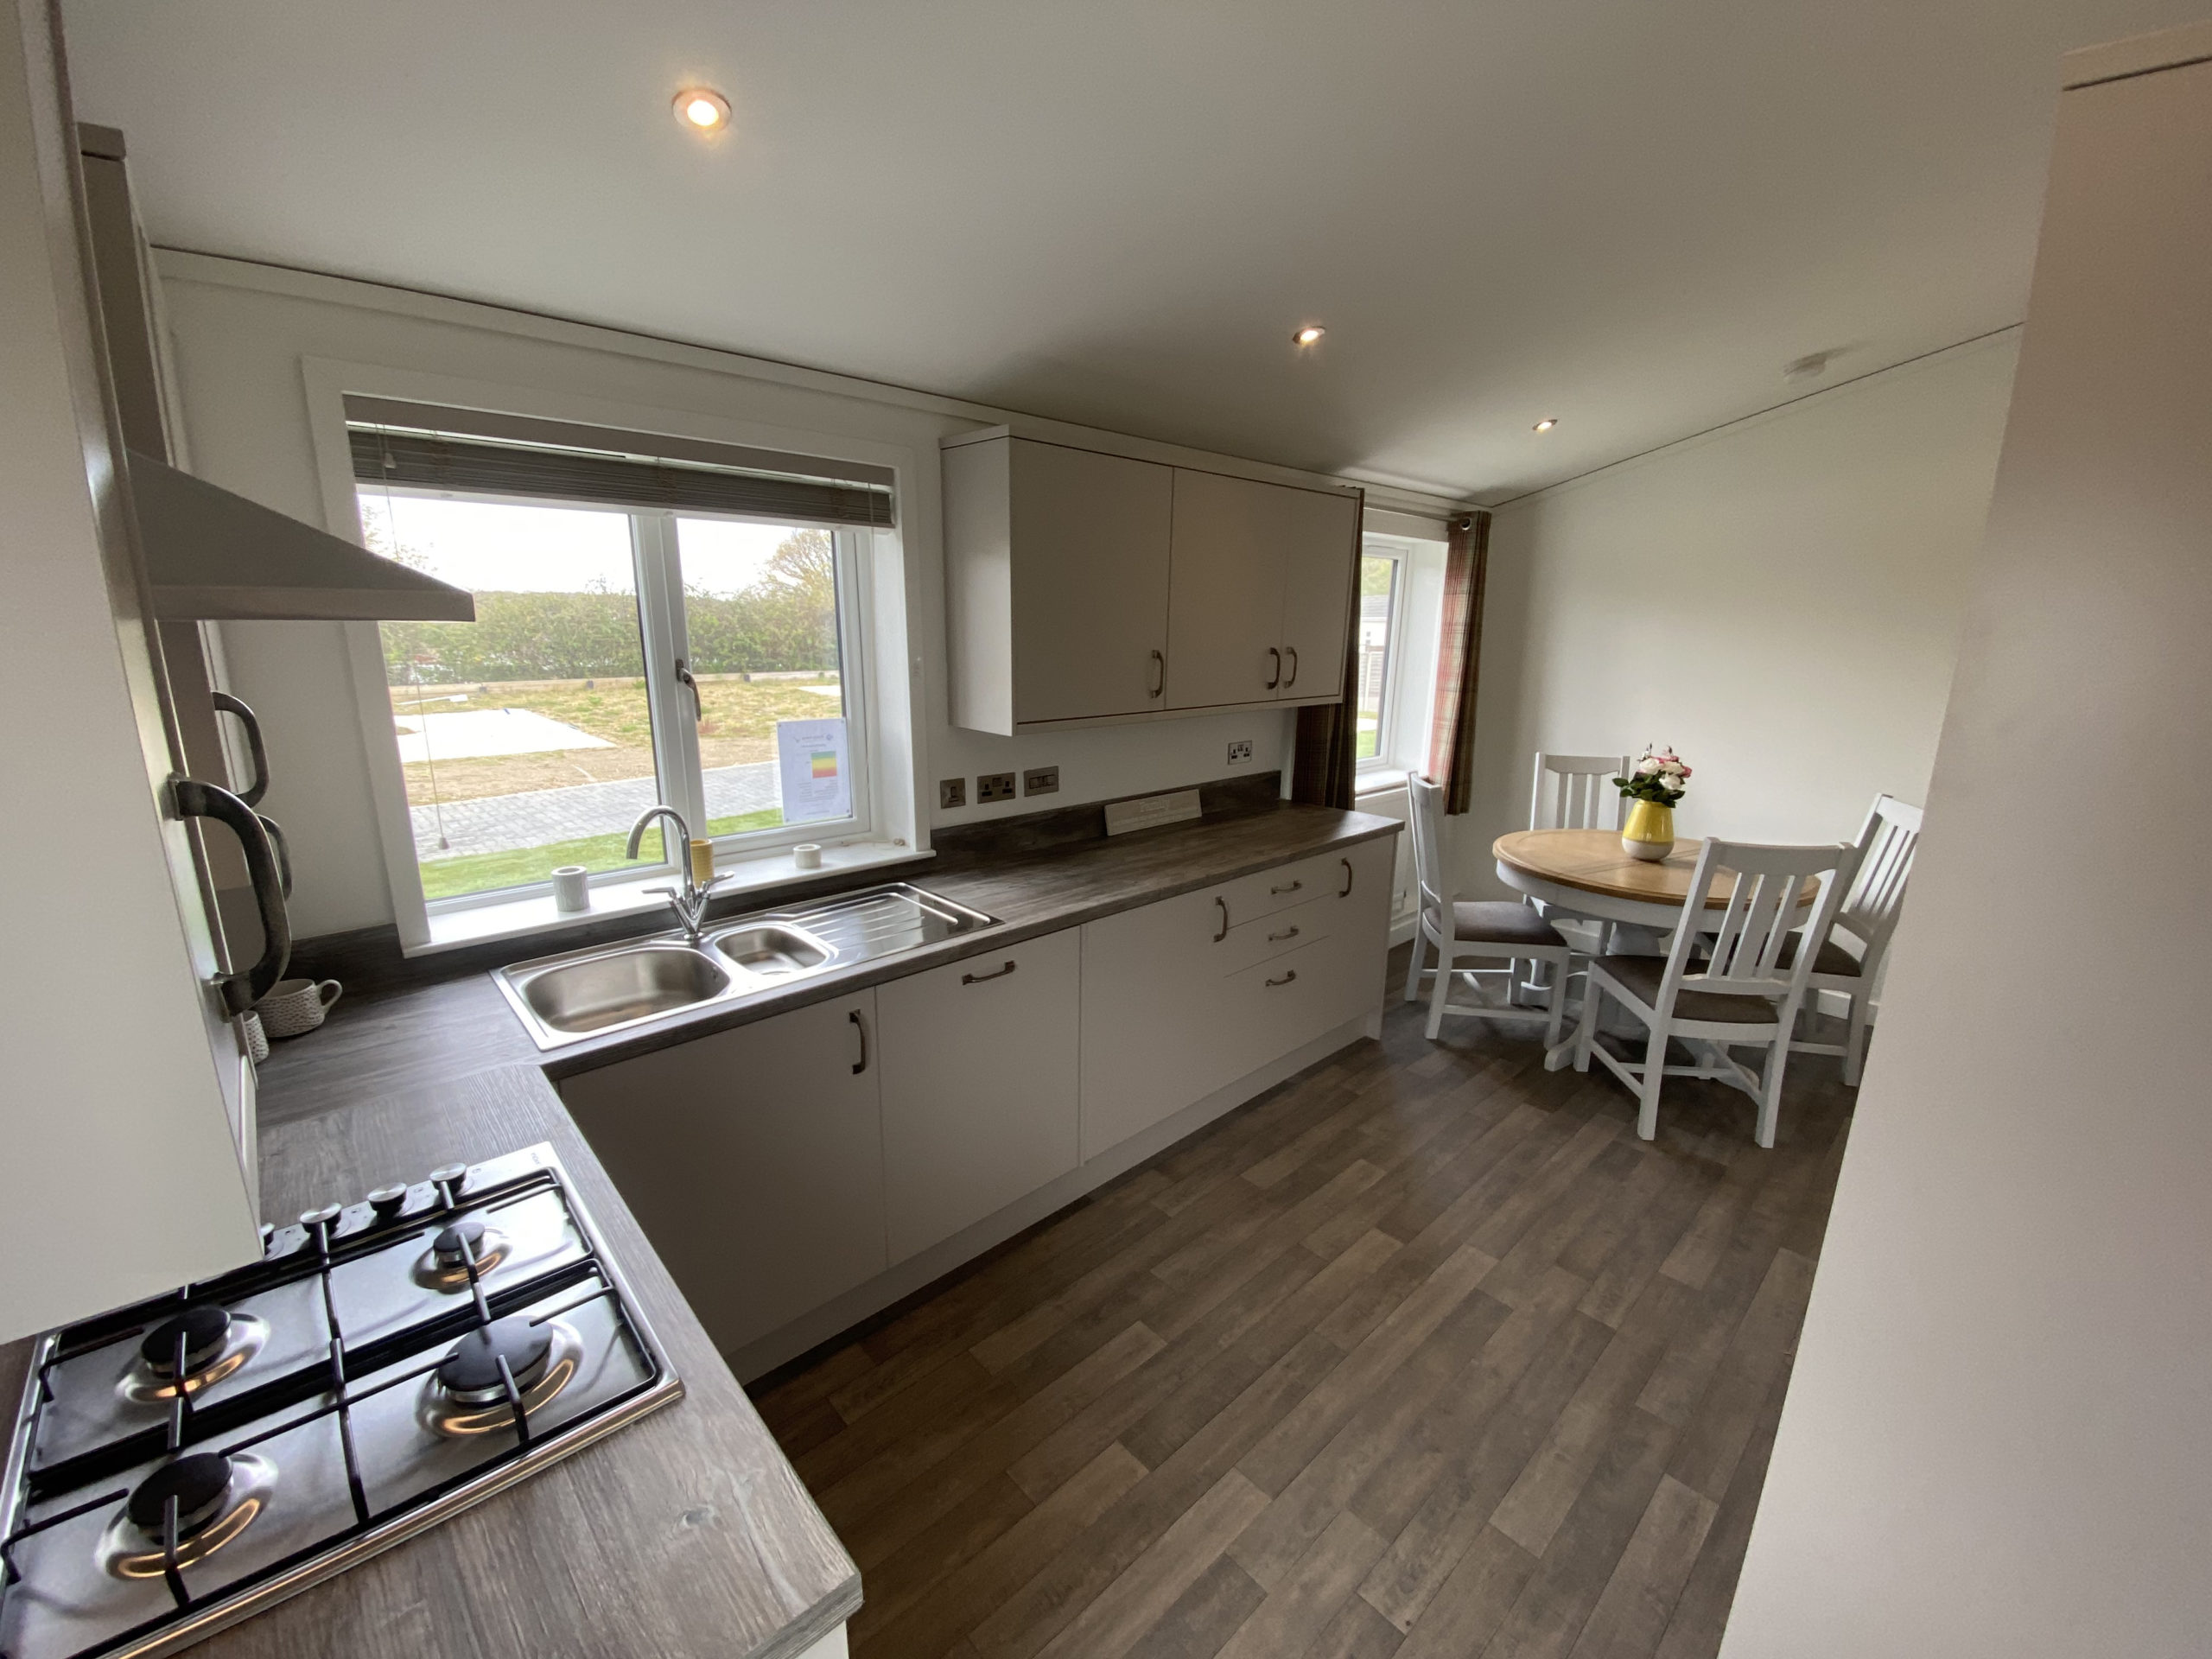 bespoke kitchen and dining